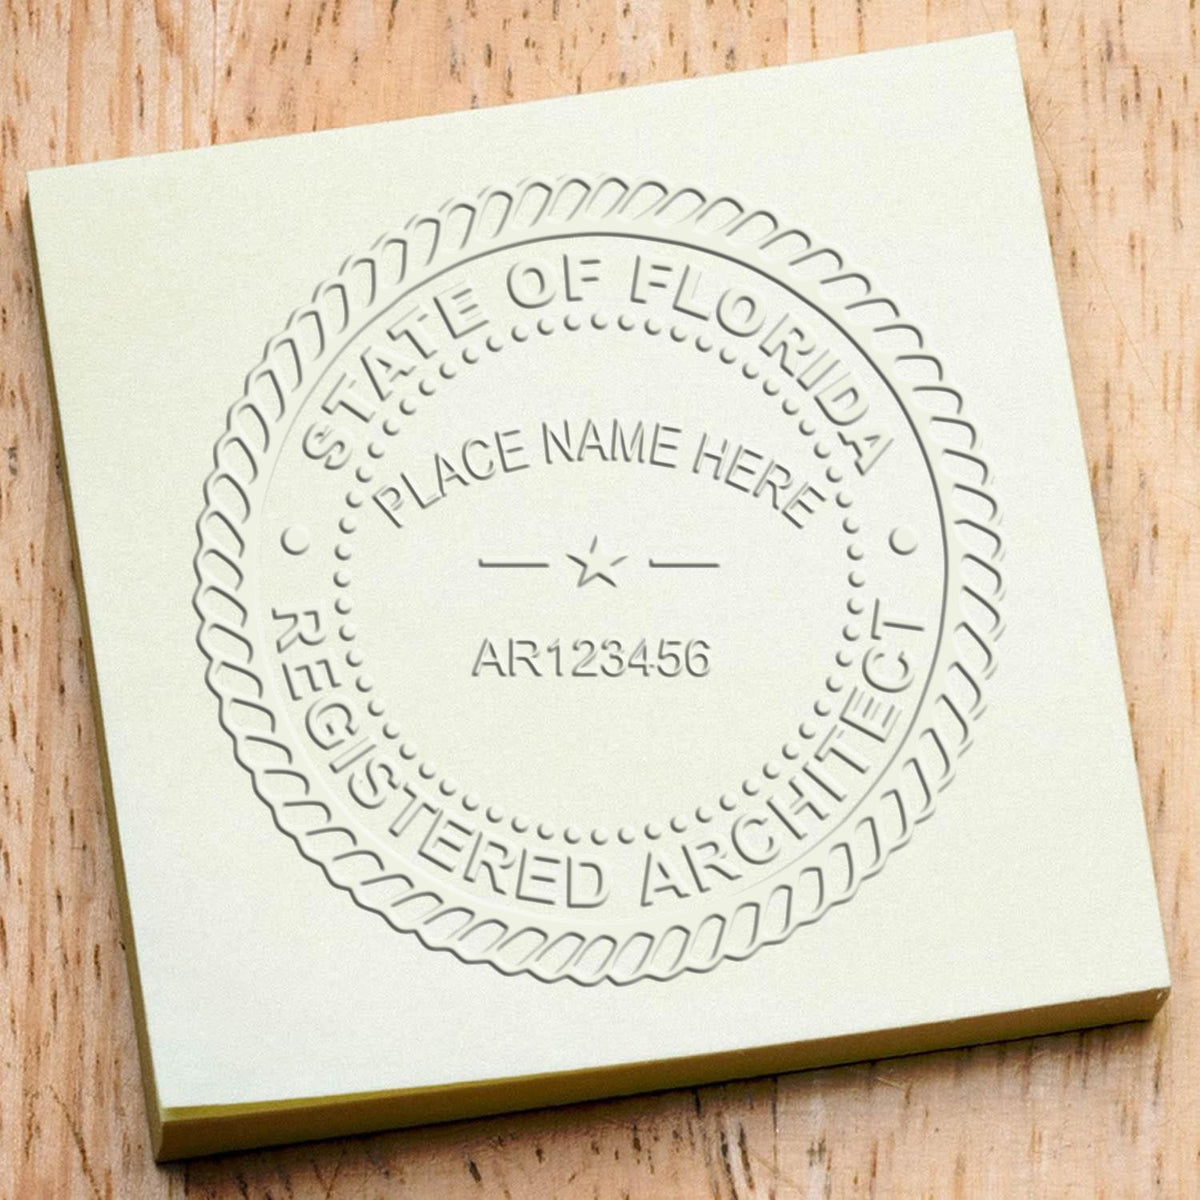 An in use photo of the Hybrid Florida Architect Seal showing a sample imprint on a cardstock